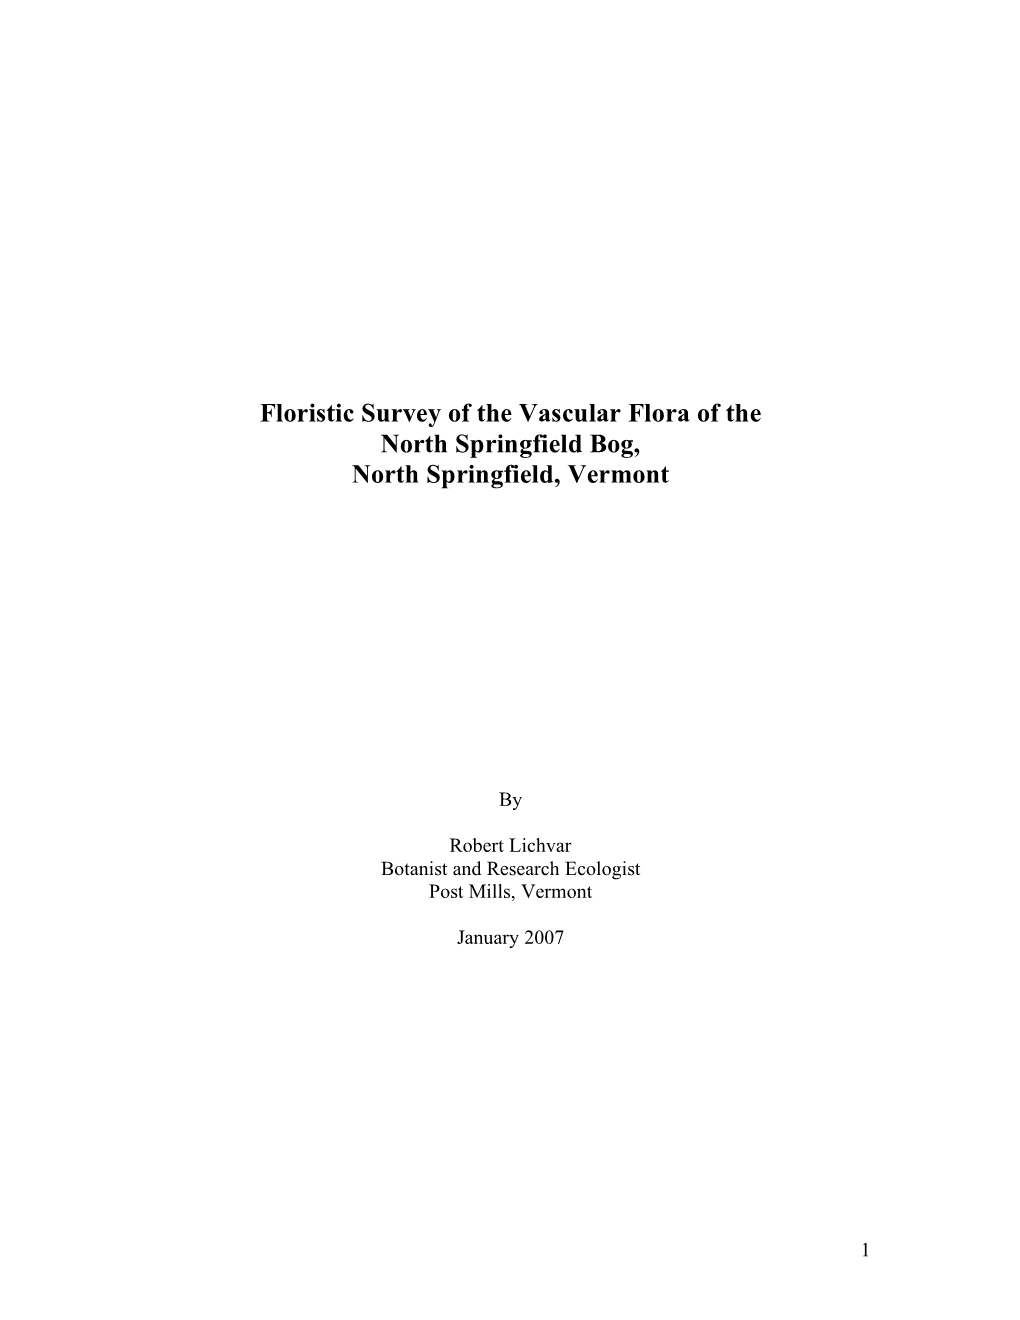 Floristic Survey of the Vascular Flora of the North Springfield Bog By